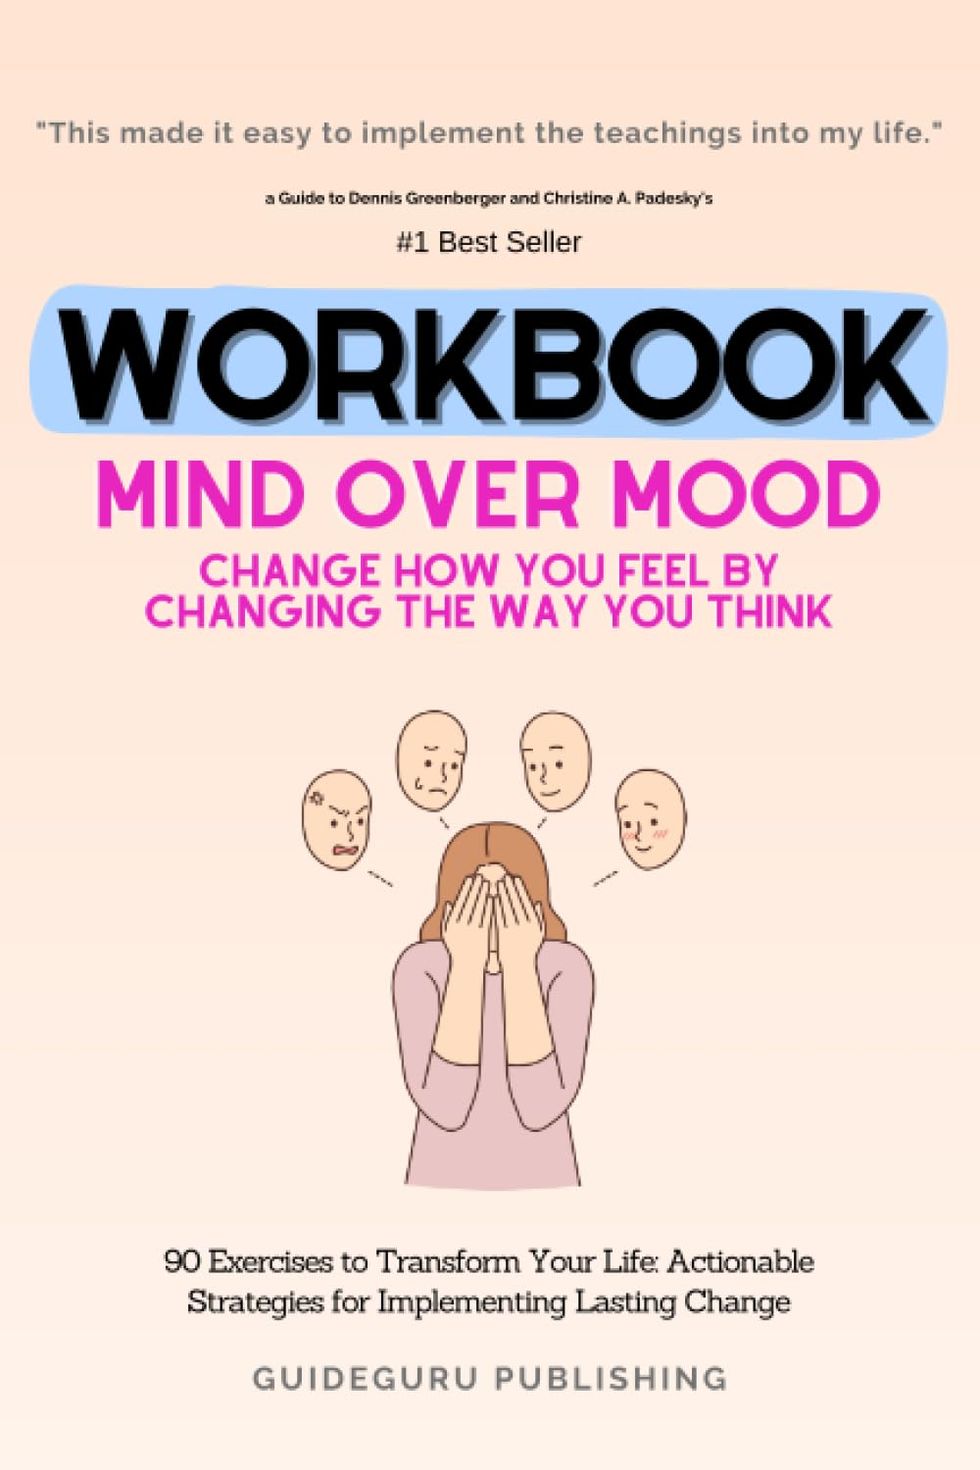 Workbook For Mind Over Mood: Change How You Feel by Changing the Way You Think by Dennis Greenberger and Christine A. Padesky: 90 Exercises to ... Strategies for Implementing Lasting Change